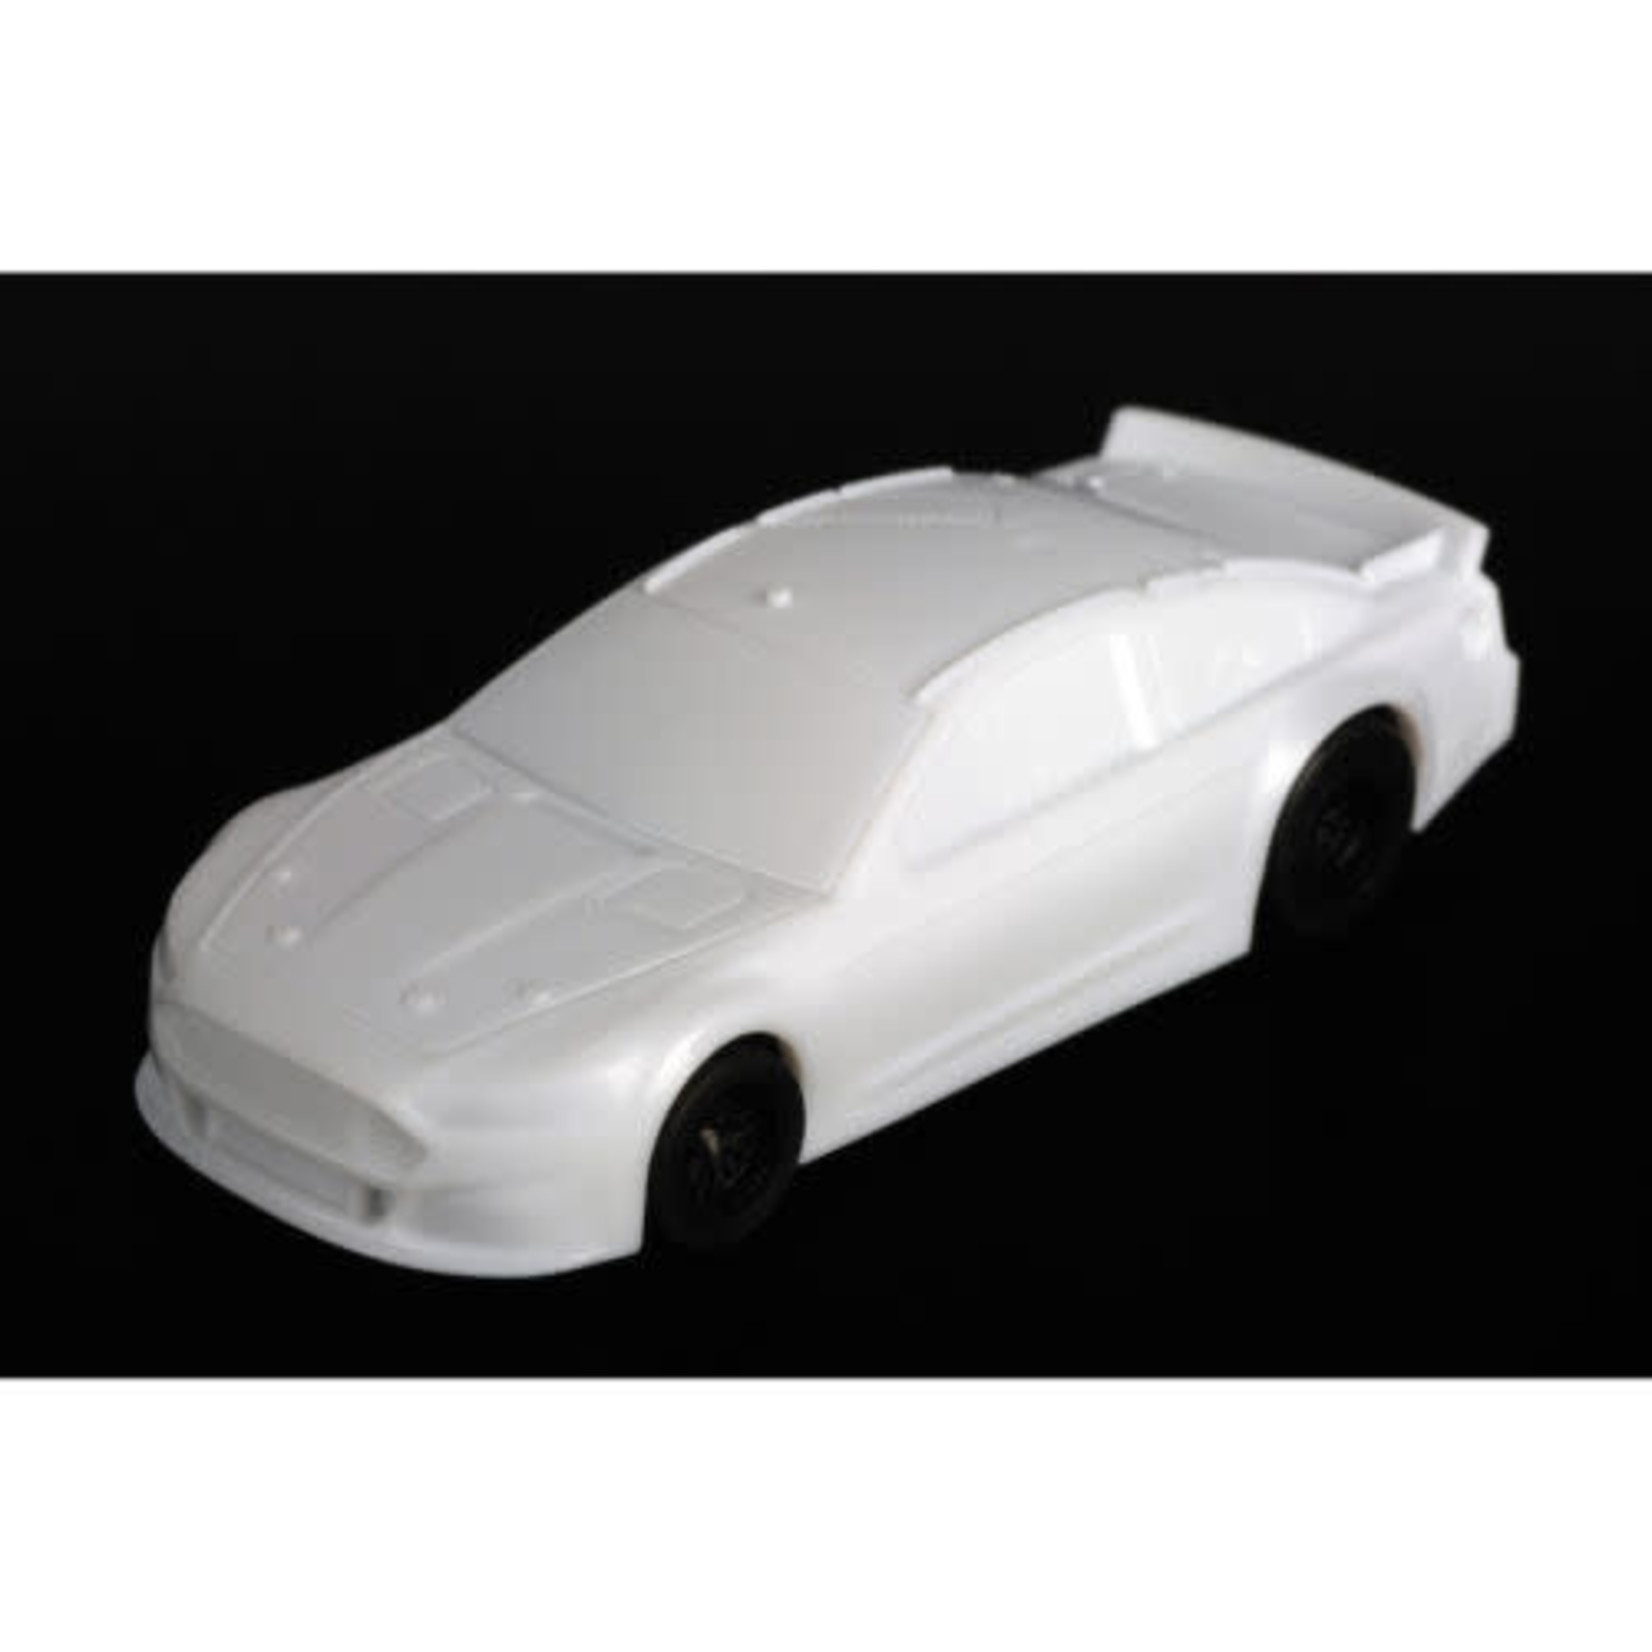 AFX Slot Cars Ford Fusion Stocker - White Paintable